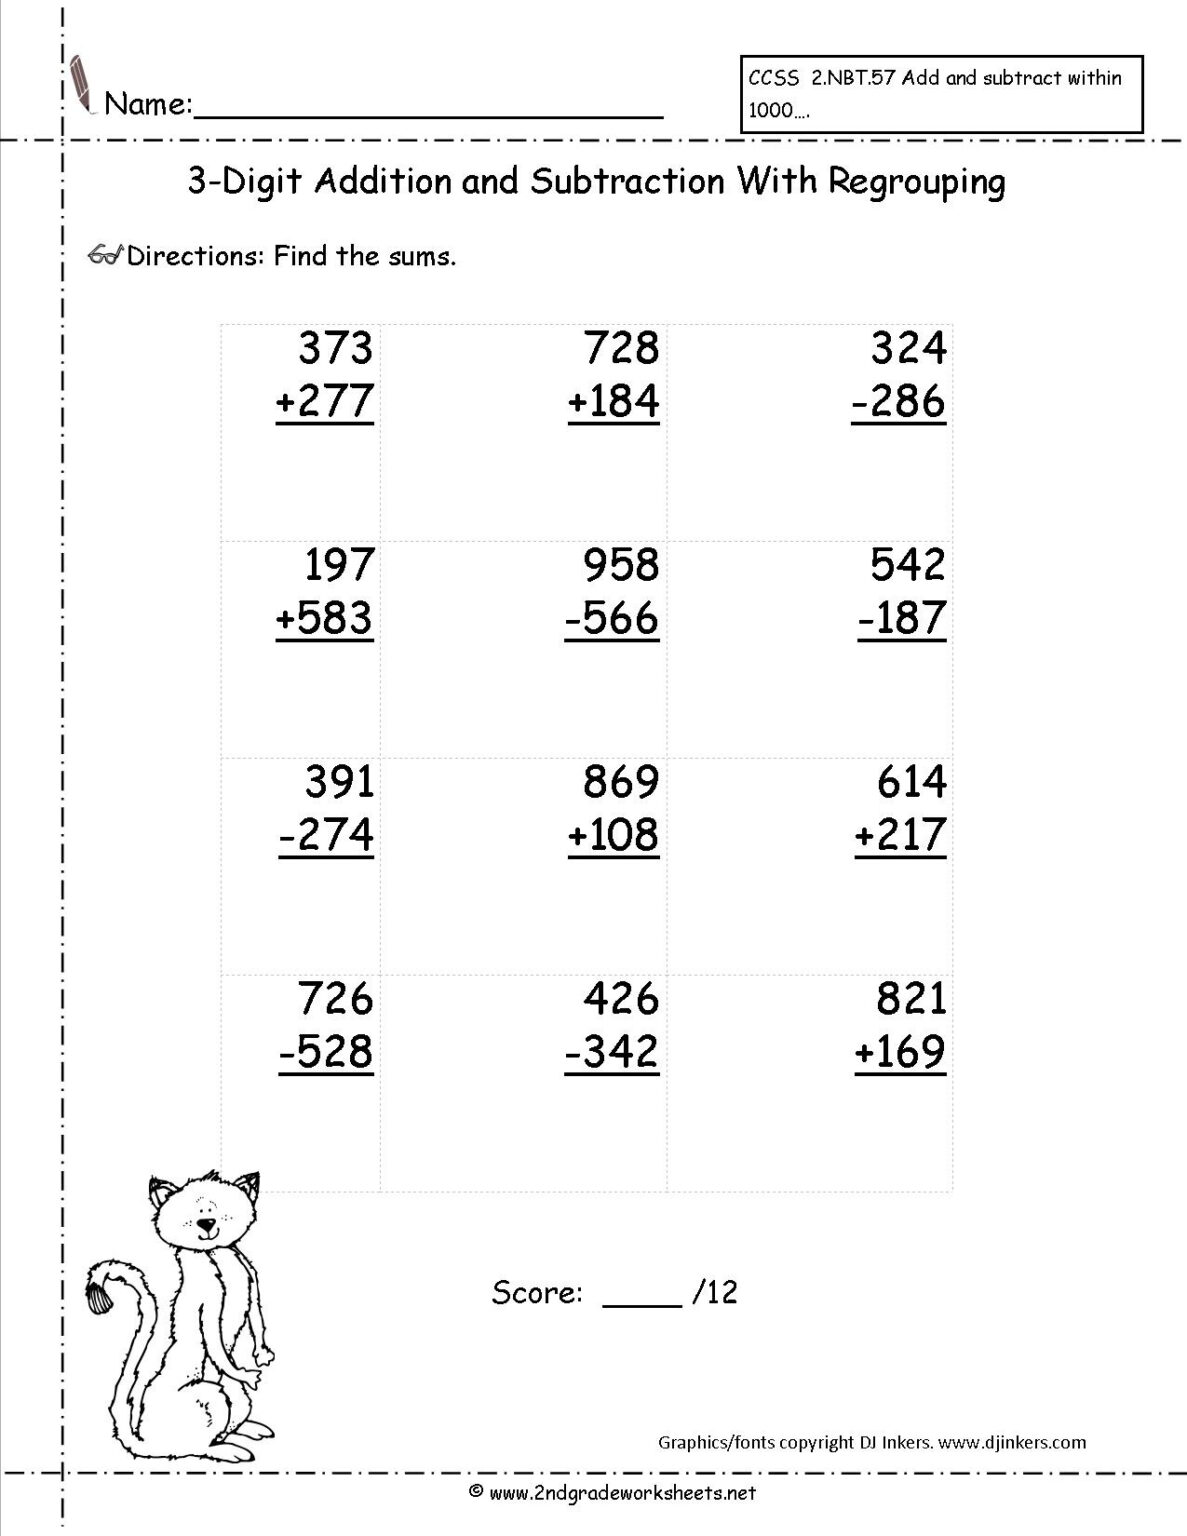 free-printable-addition-and-subtraction-worksheets-for-5th-grade